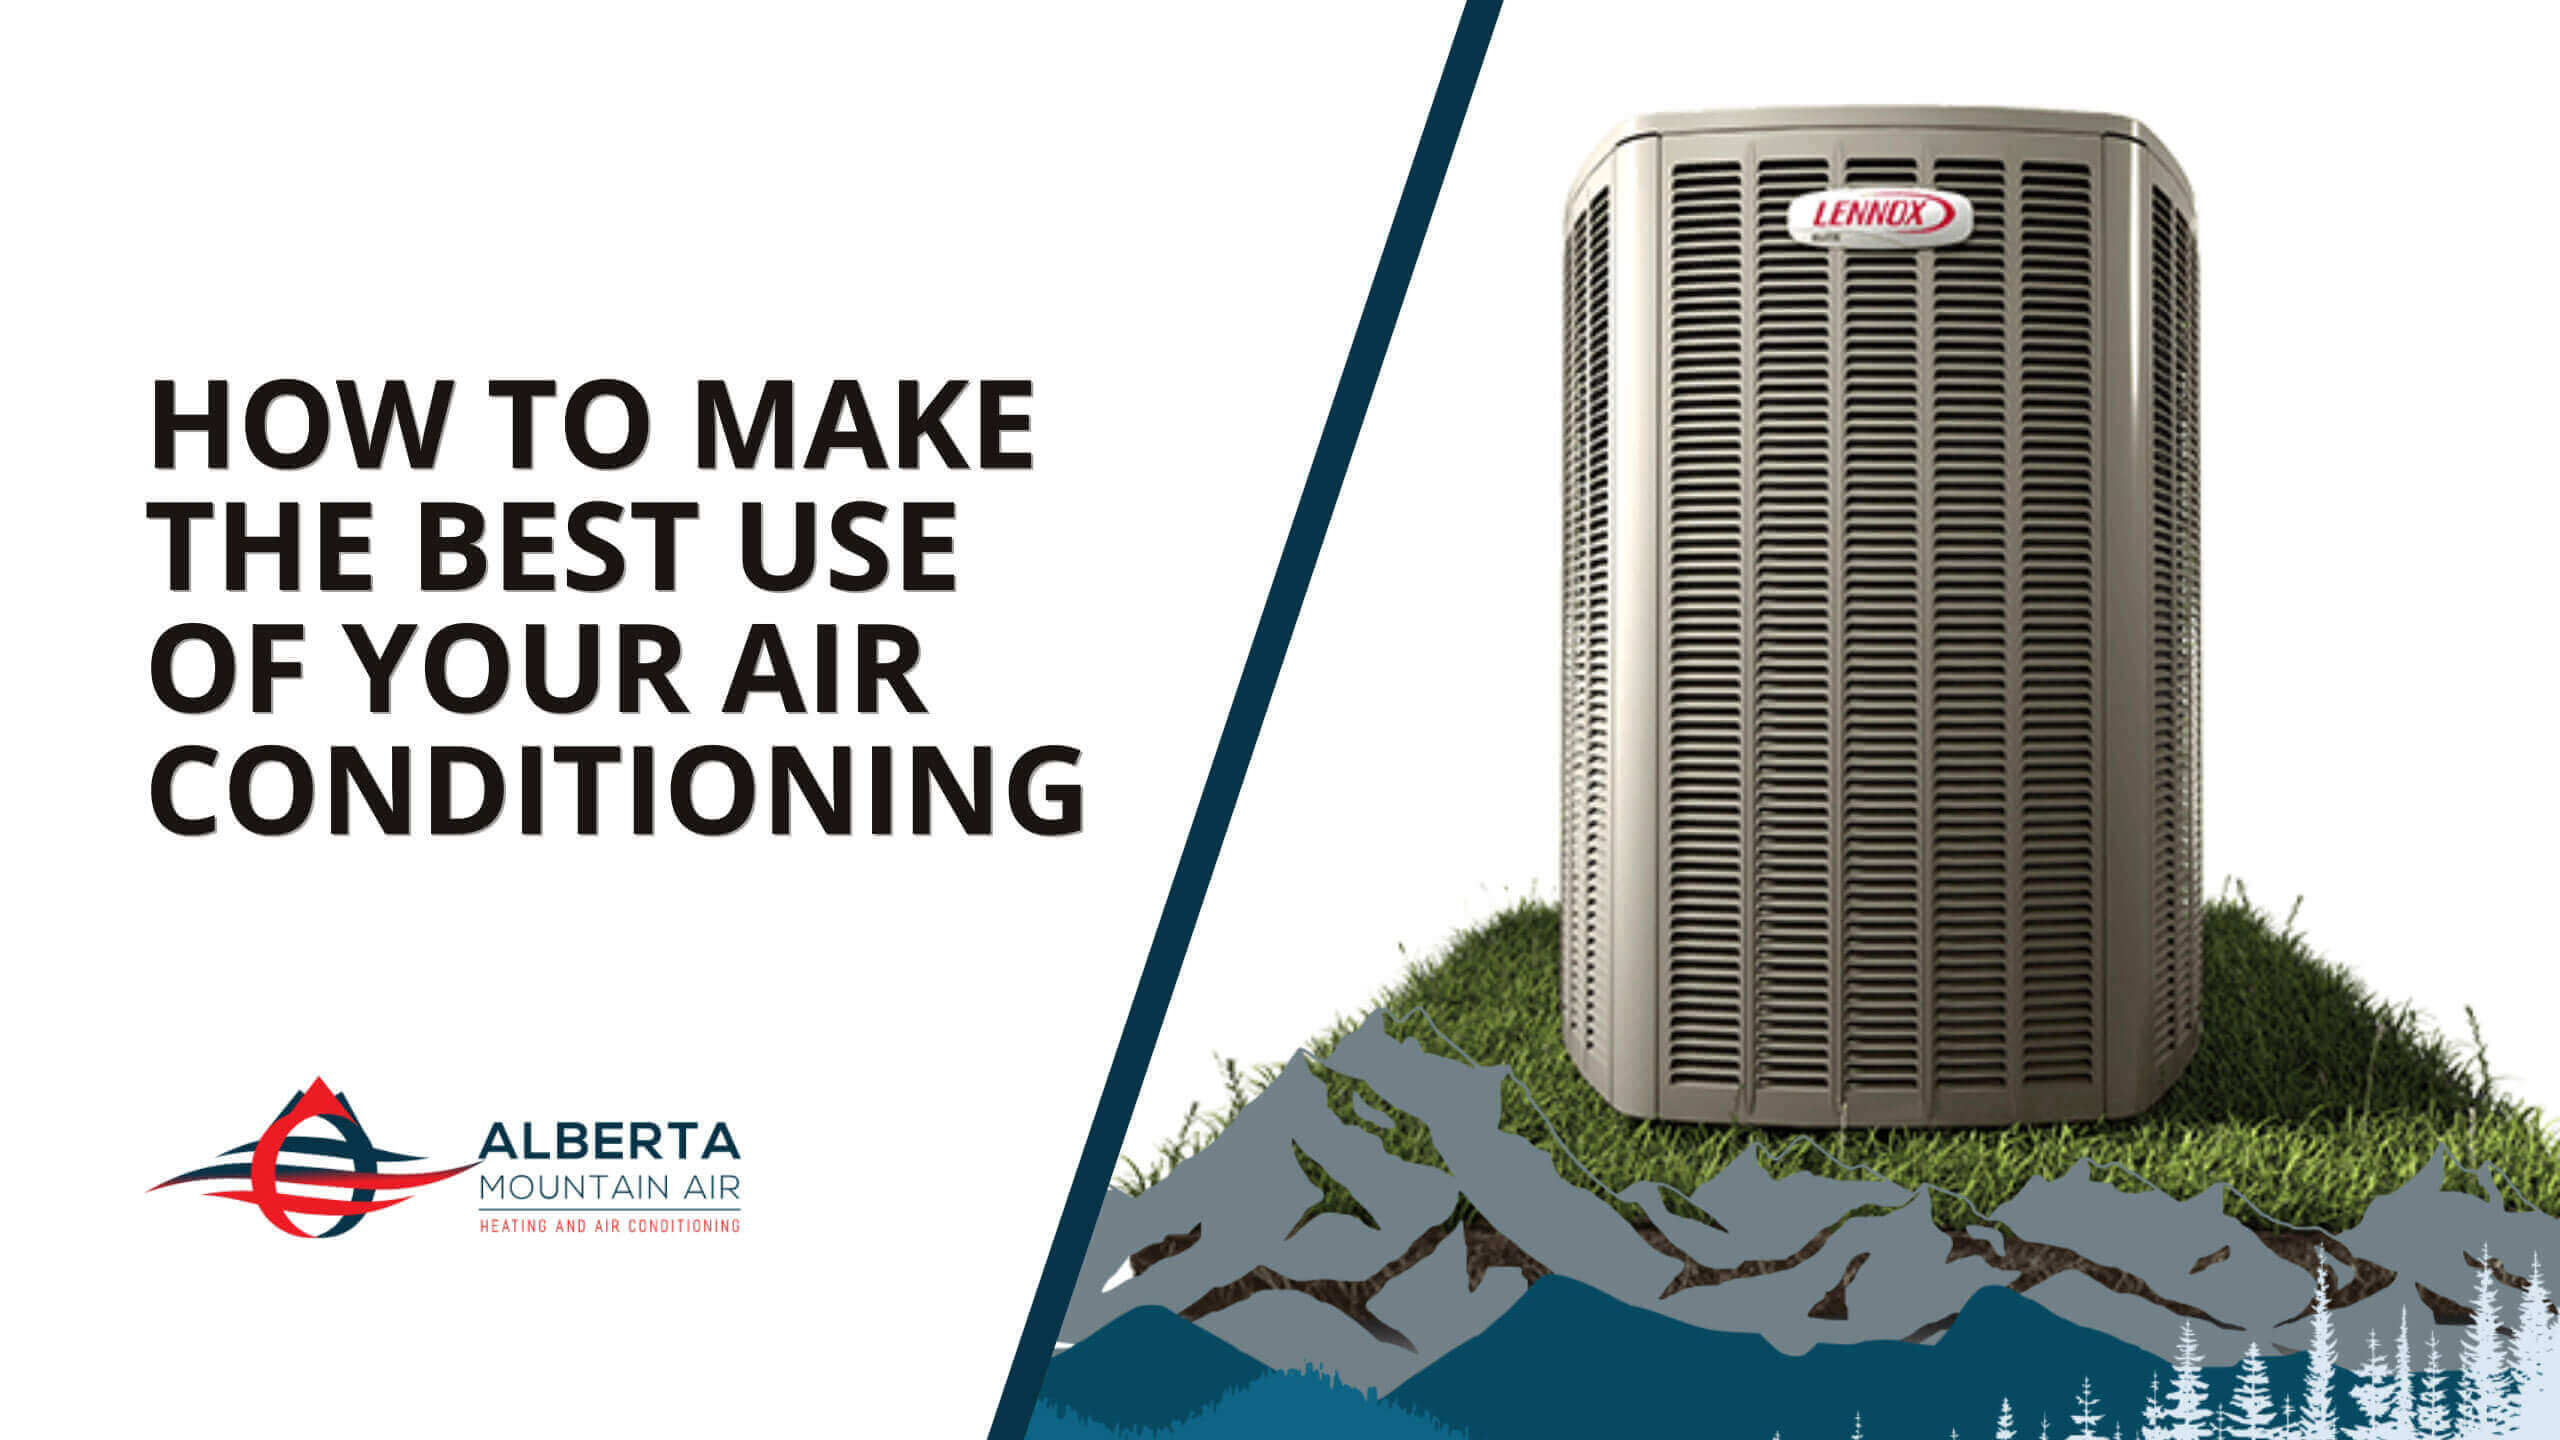 How to Make the Best Use of Your Air Conditioning